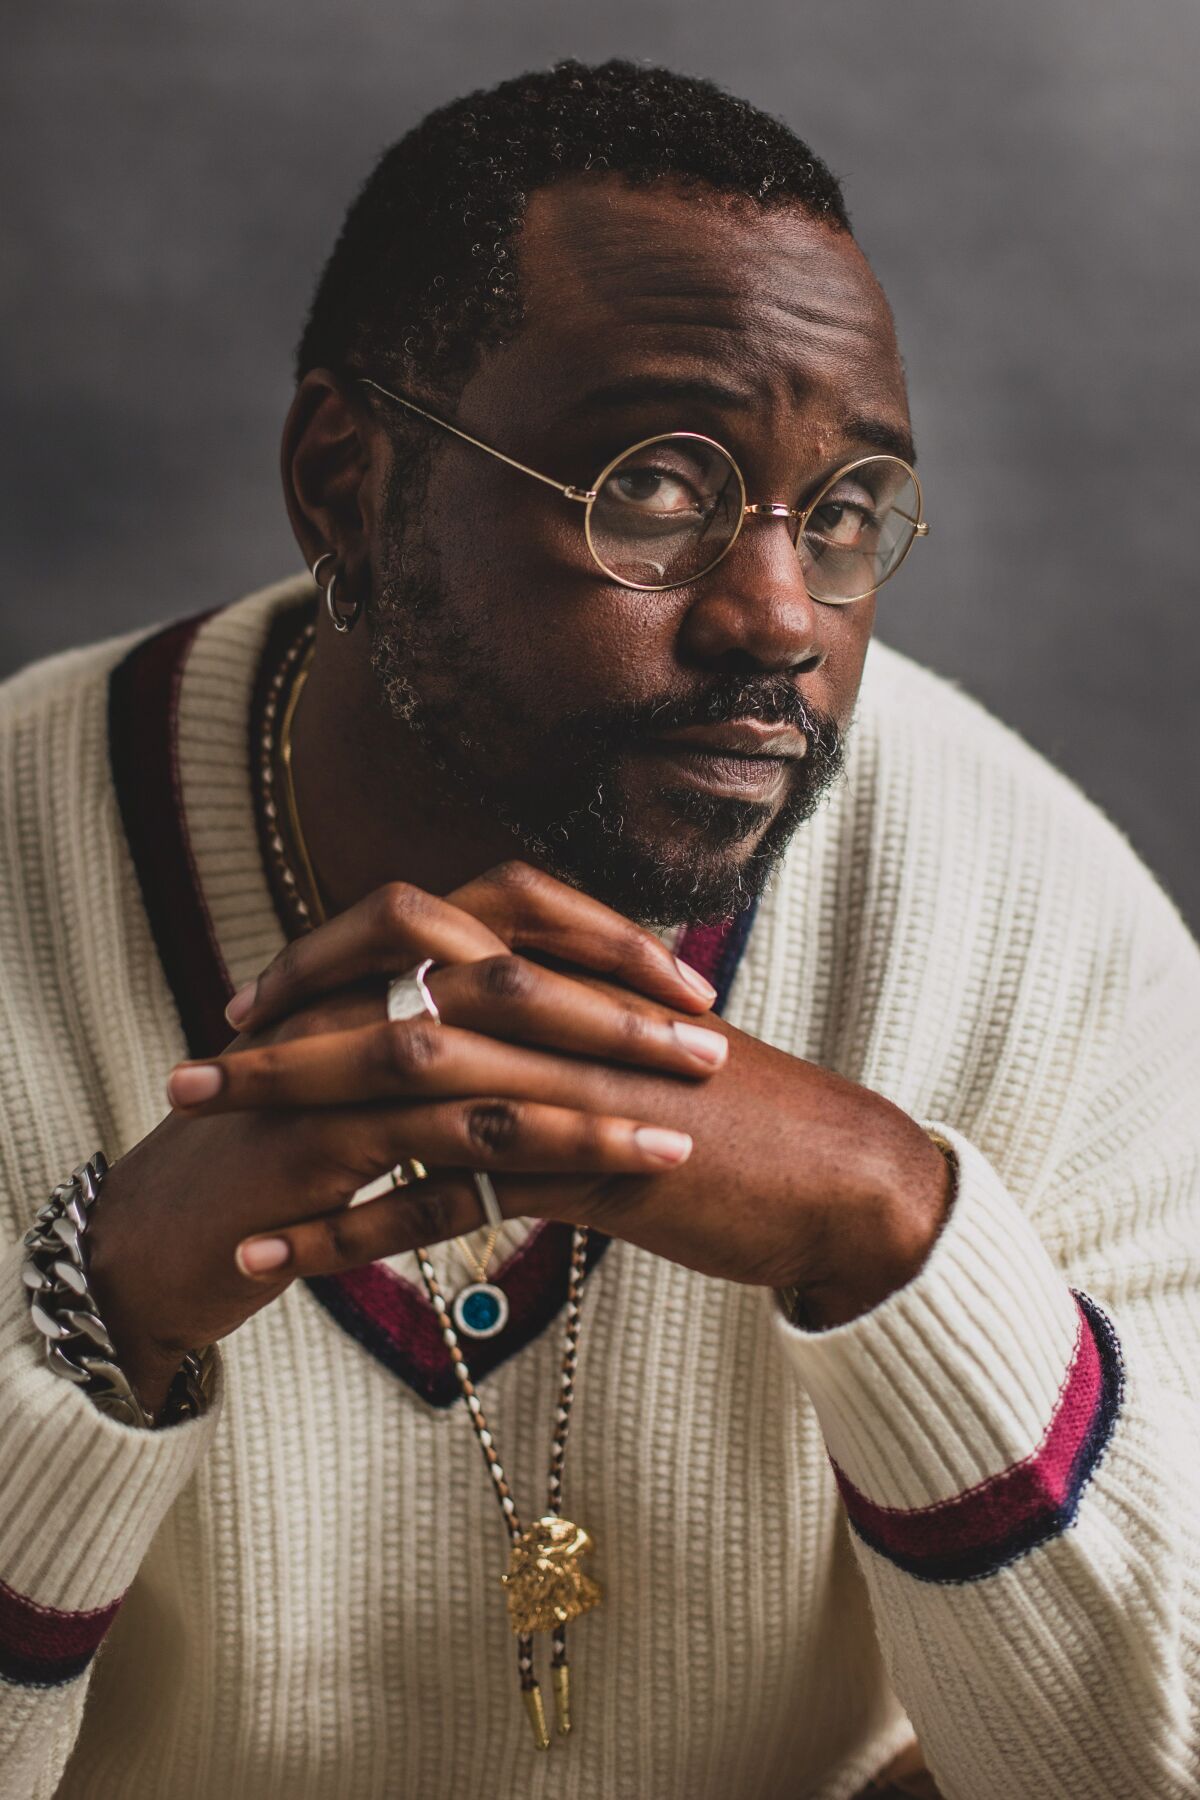 Brian Tyree Henry folds his hands in front of him for a portrait.